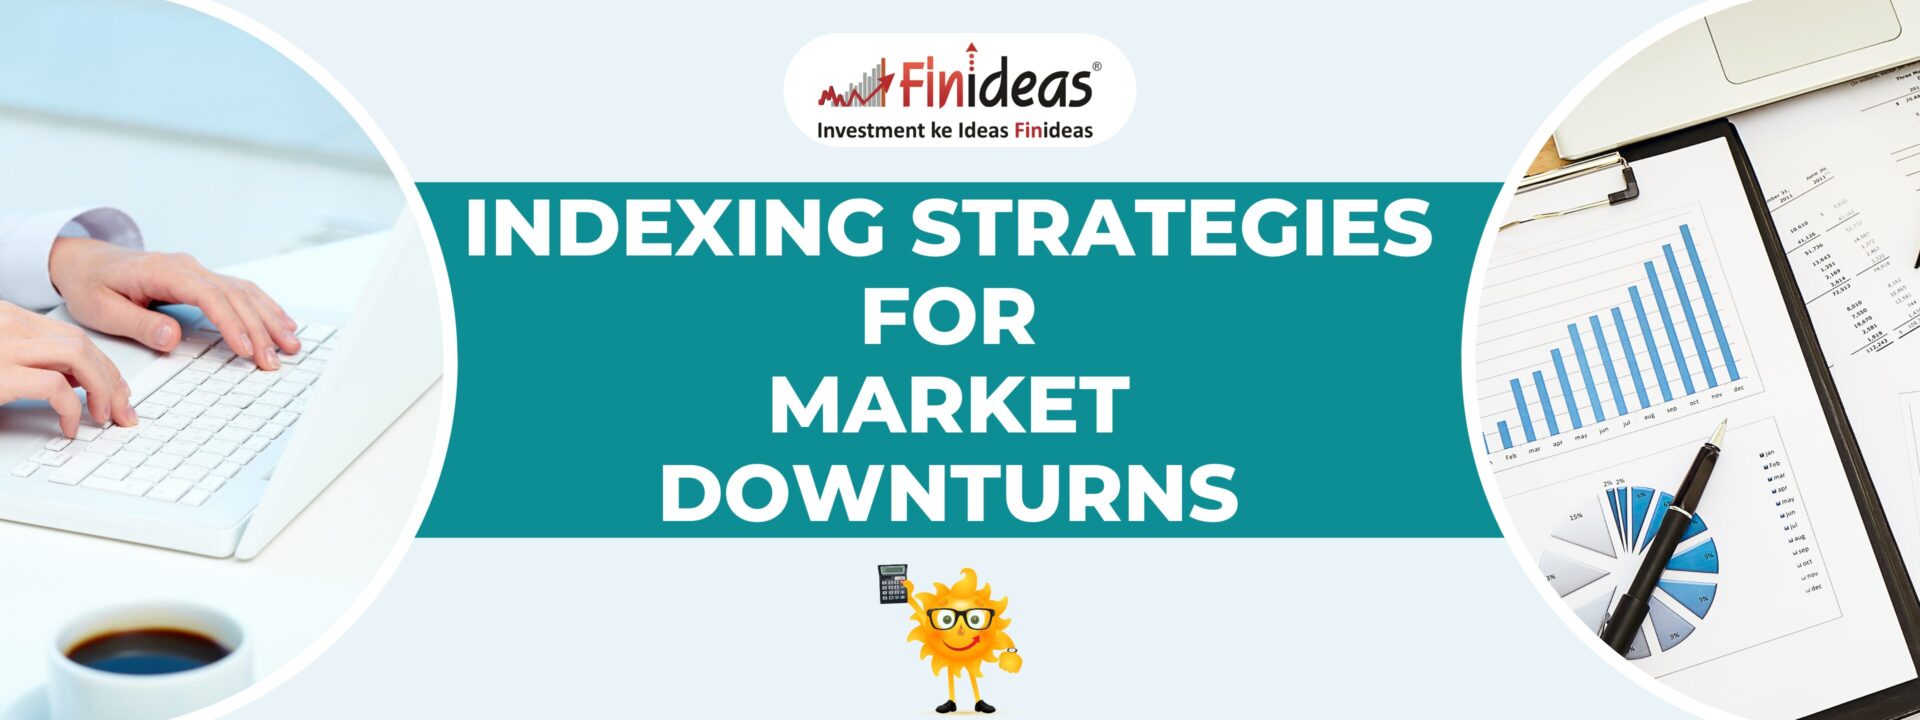 Indexing Strategies for Market Downturns: Patience Amidst Volatility